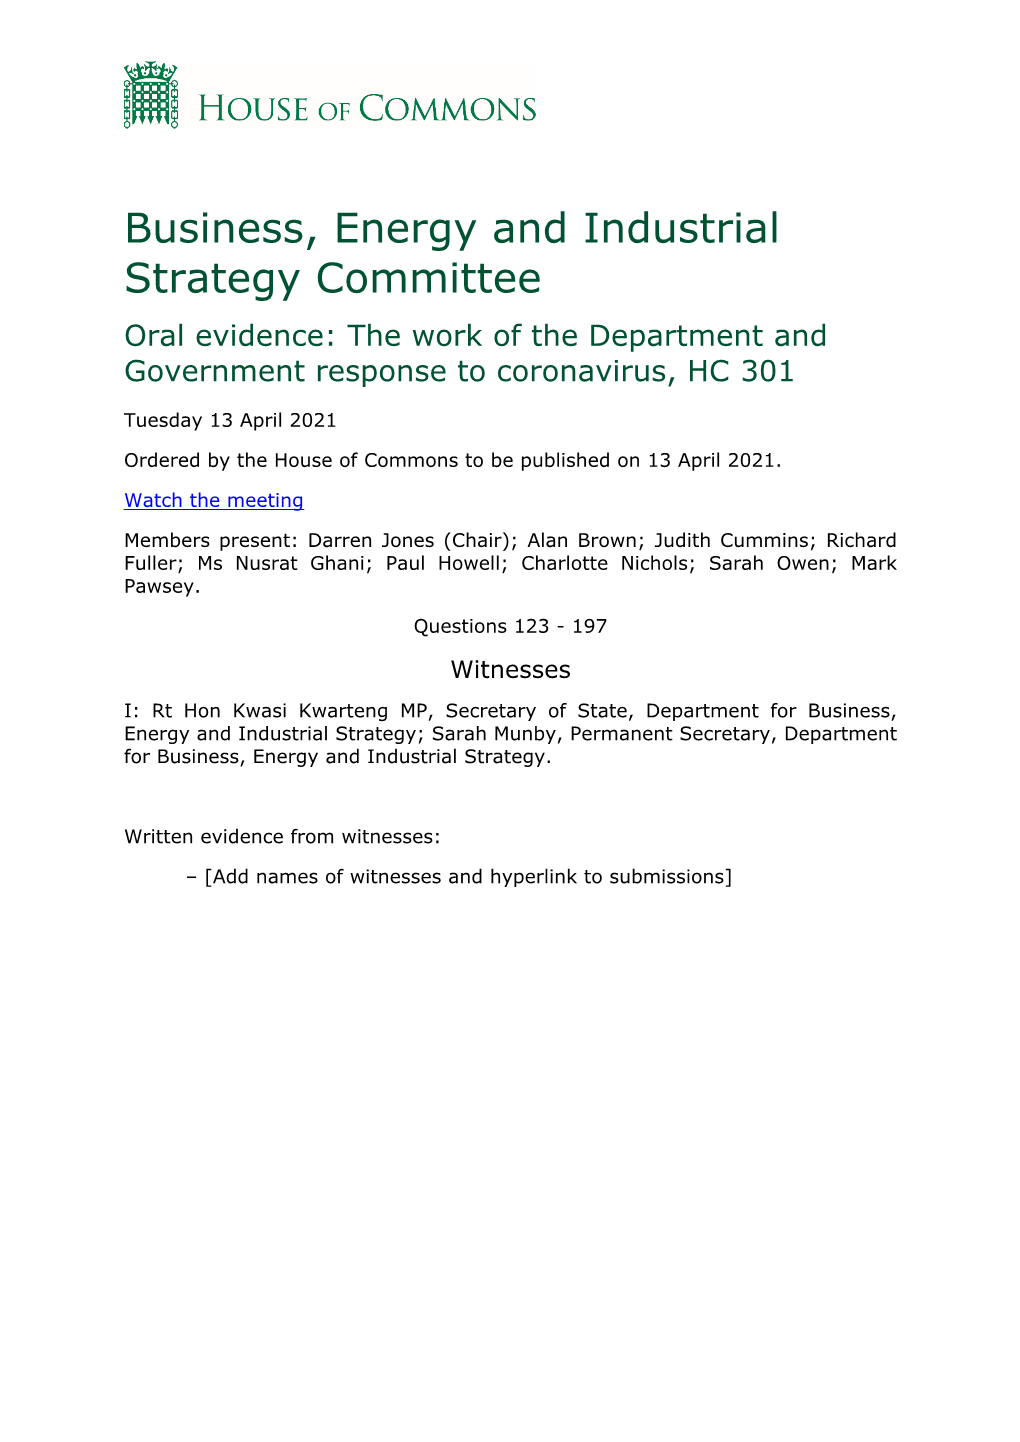 Business, Energy and Industrial Strategy Committee Oral Evidence: the Work of the Department and Government Response to Coronavirus, HC 301